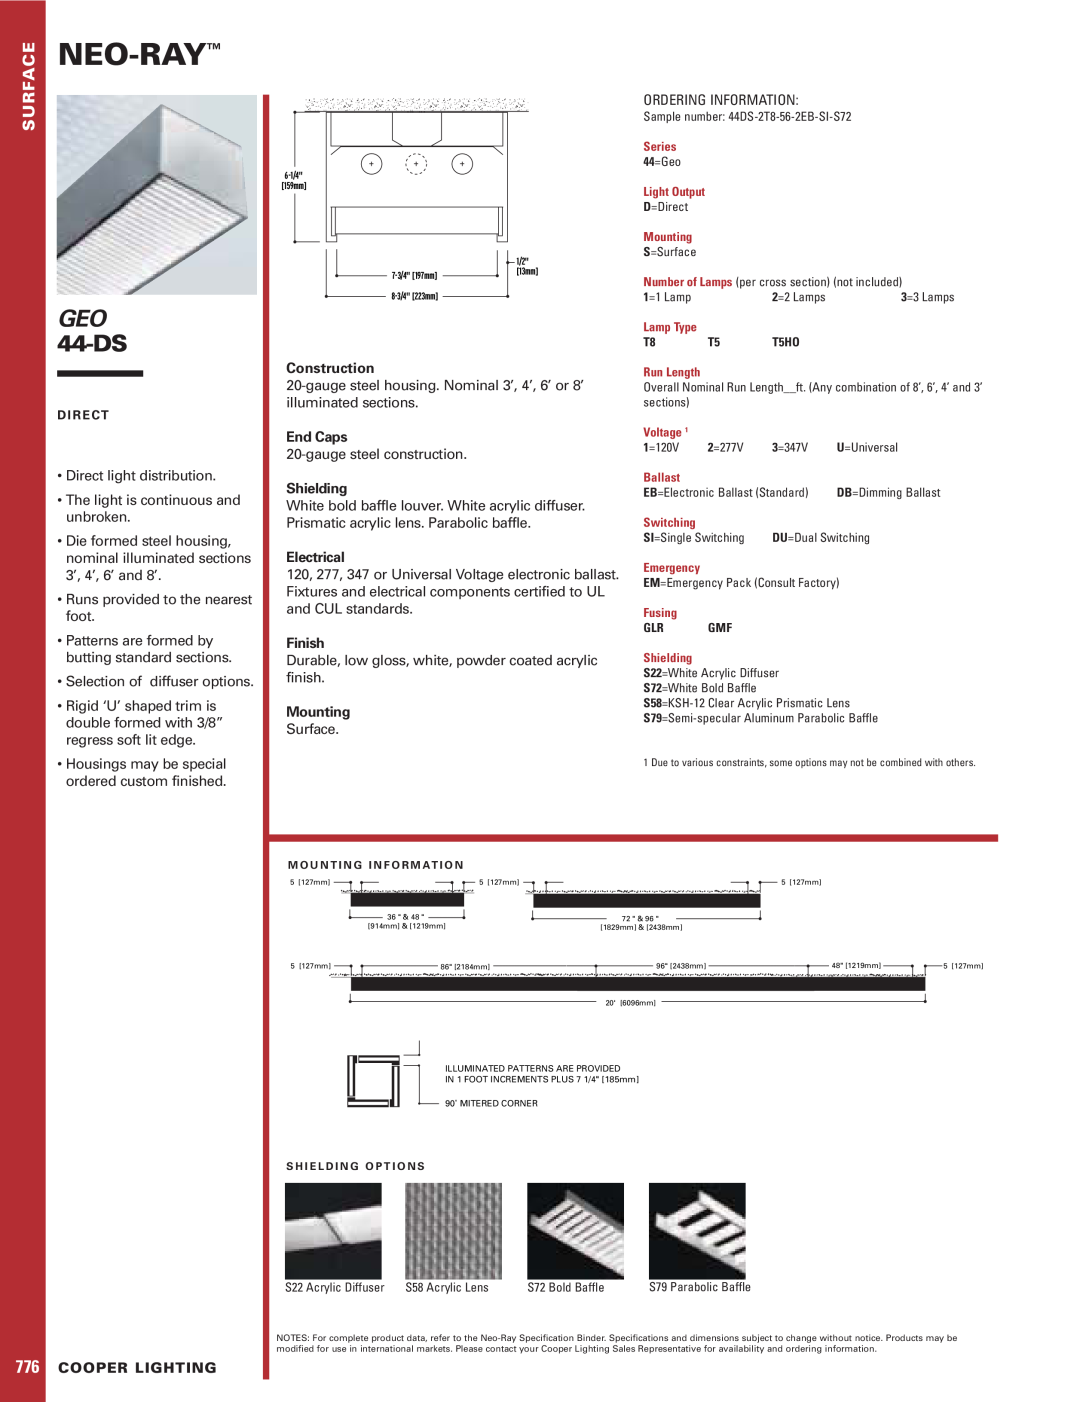 Cooper Lighting specifications Neo-Ray, GEO 44-DS, Surface, Construction, End Caps, Shielding, Cooper Lighting, Finish 